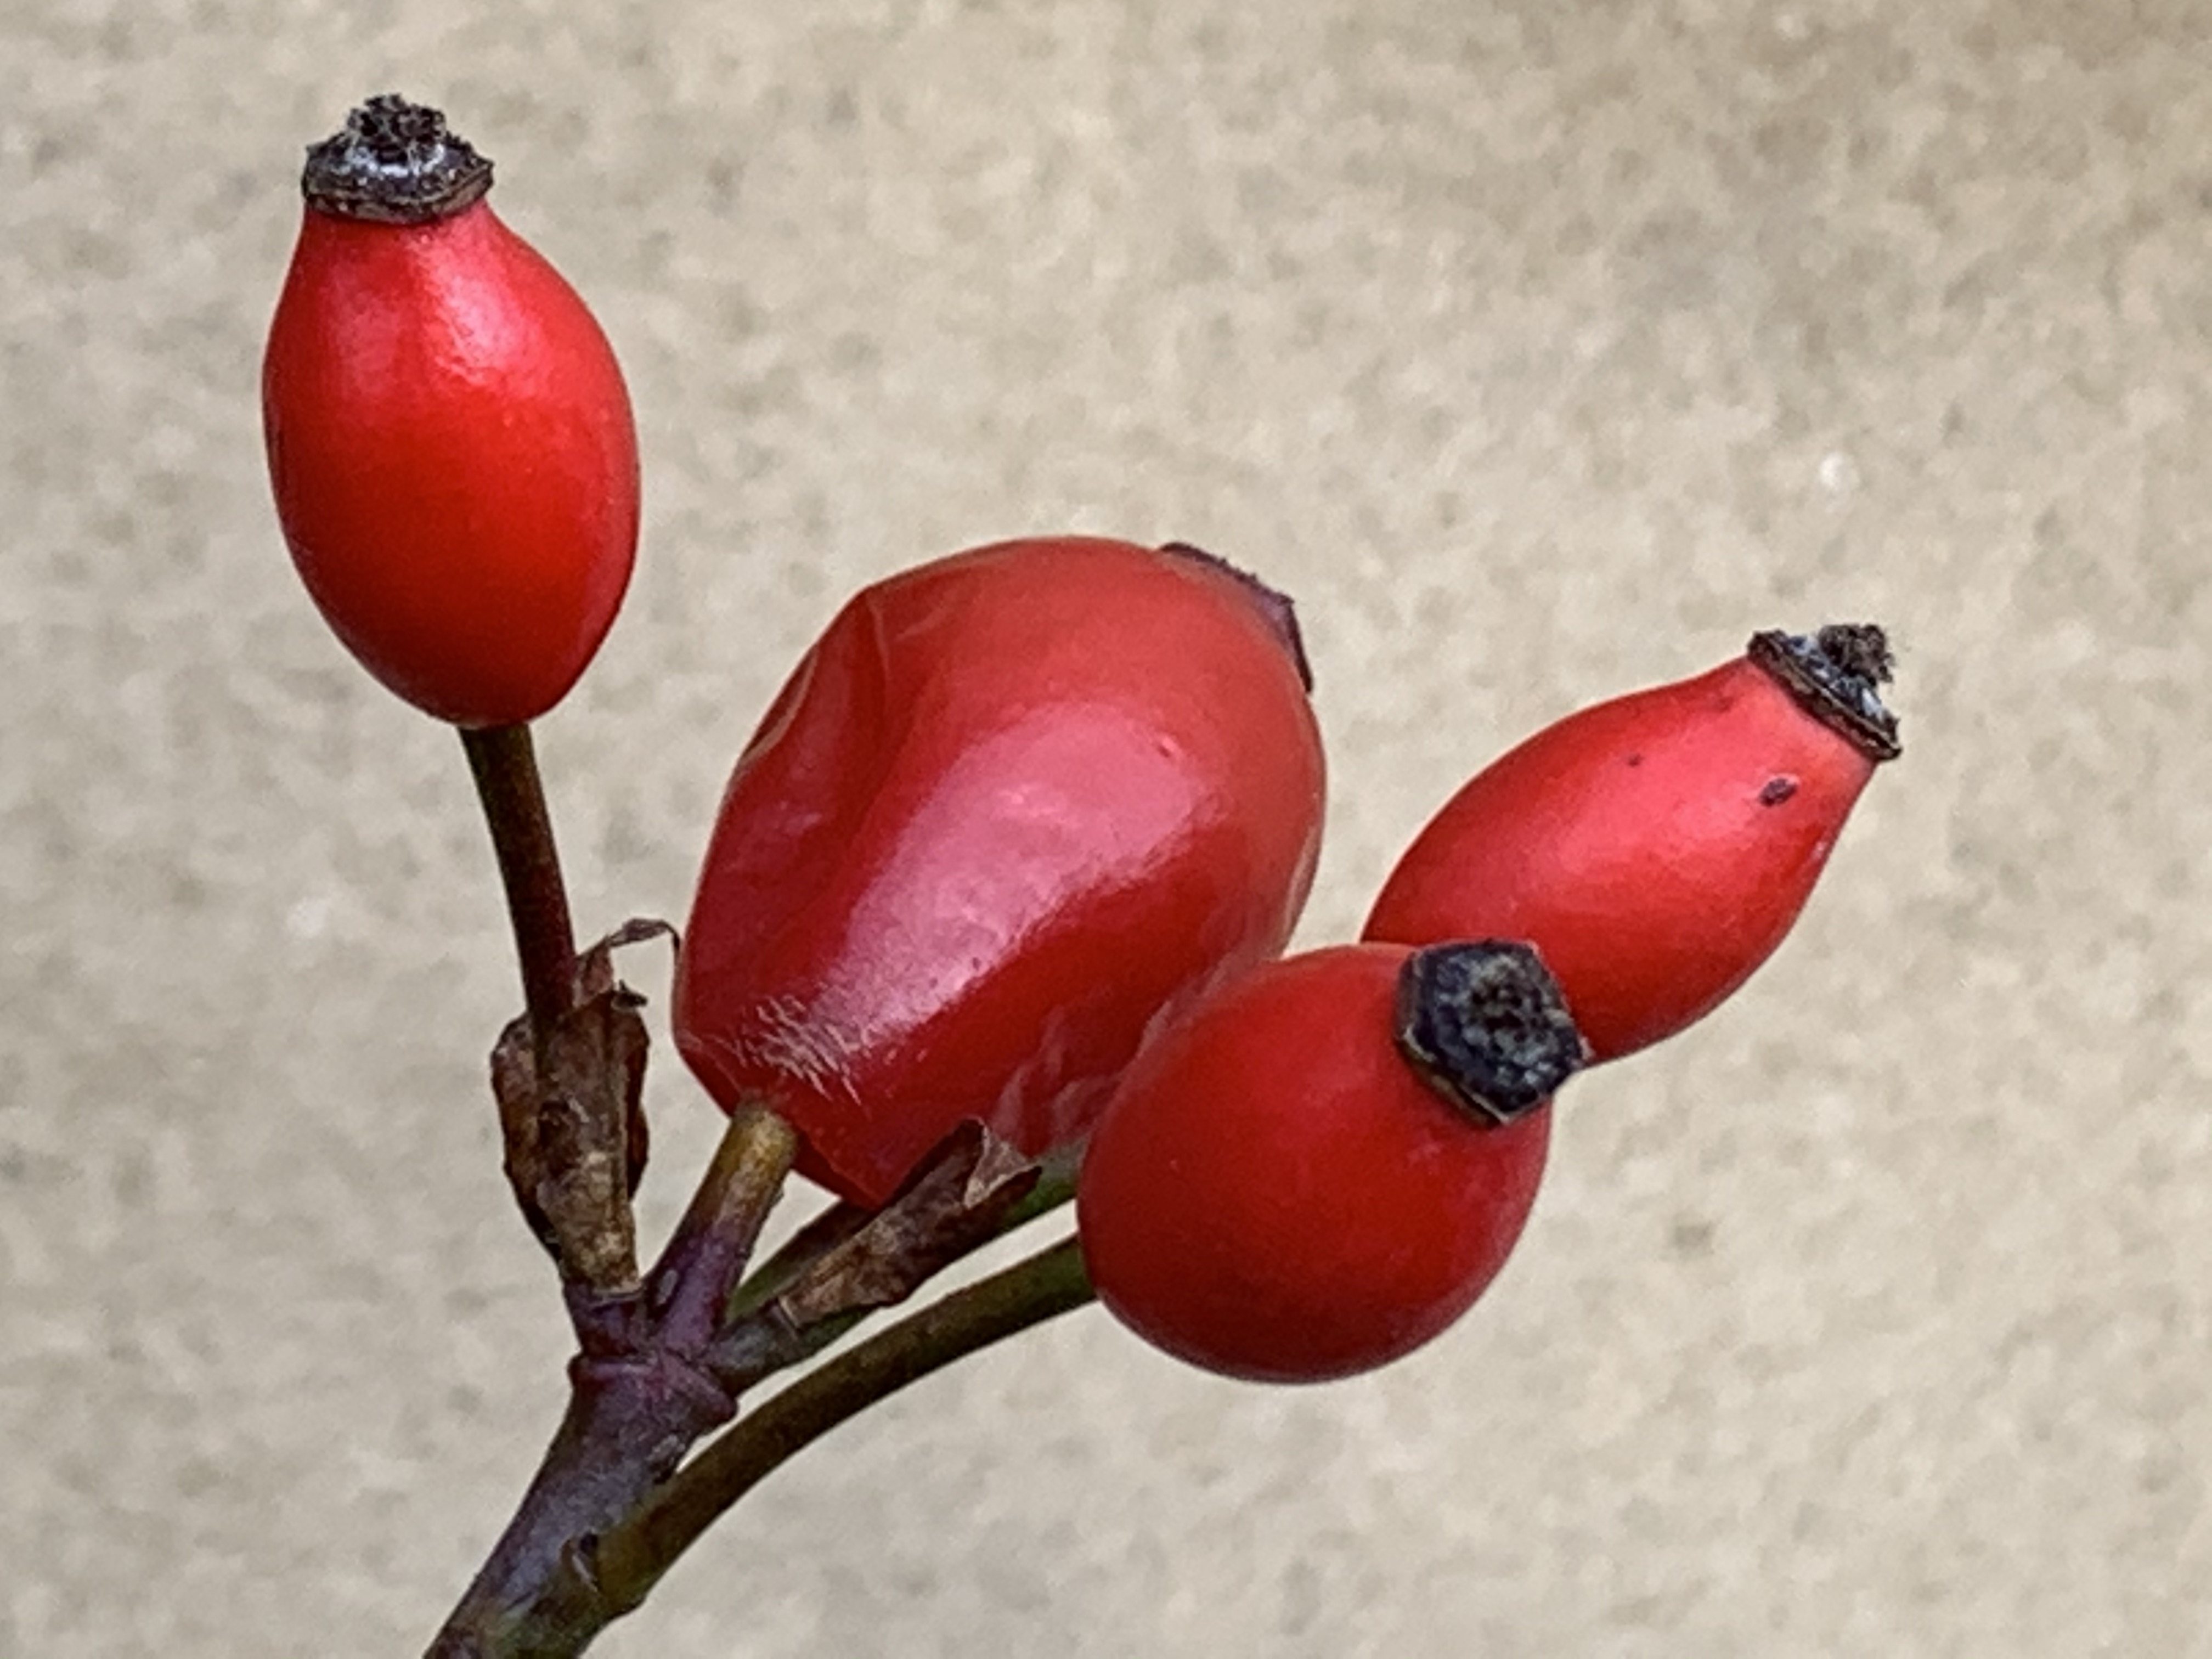 Rose hips buds - cherry red buds